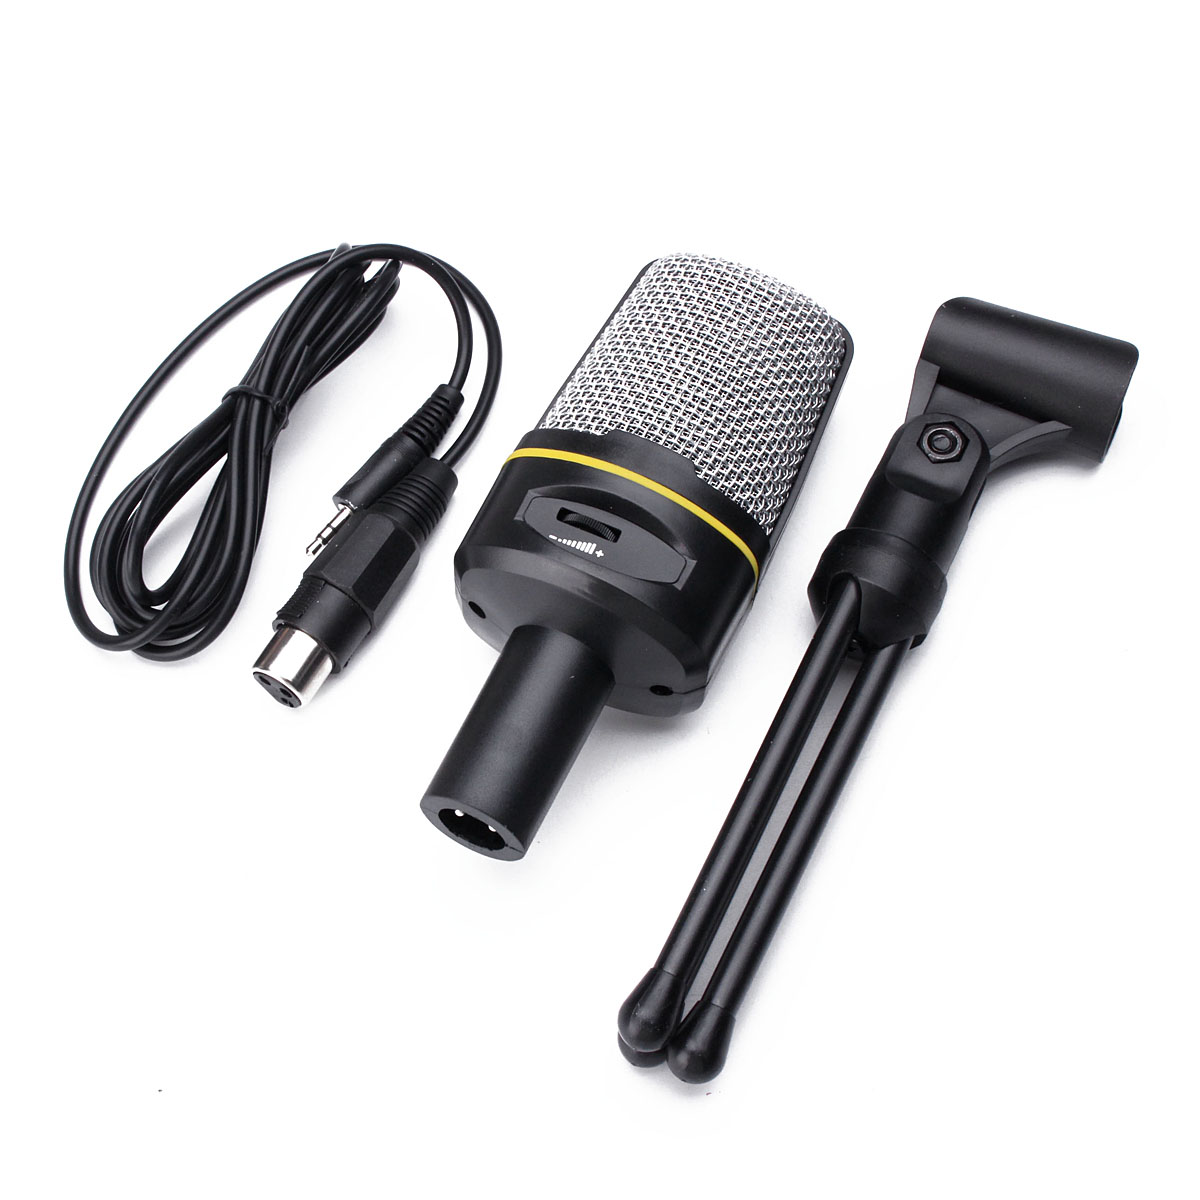 35-mm-Condenser-Microphone-Mic-For-MSN-Skype-Singing-Recording-Laptop-Notebook-PC-1109293